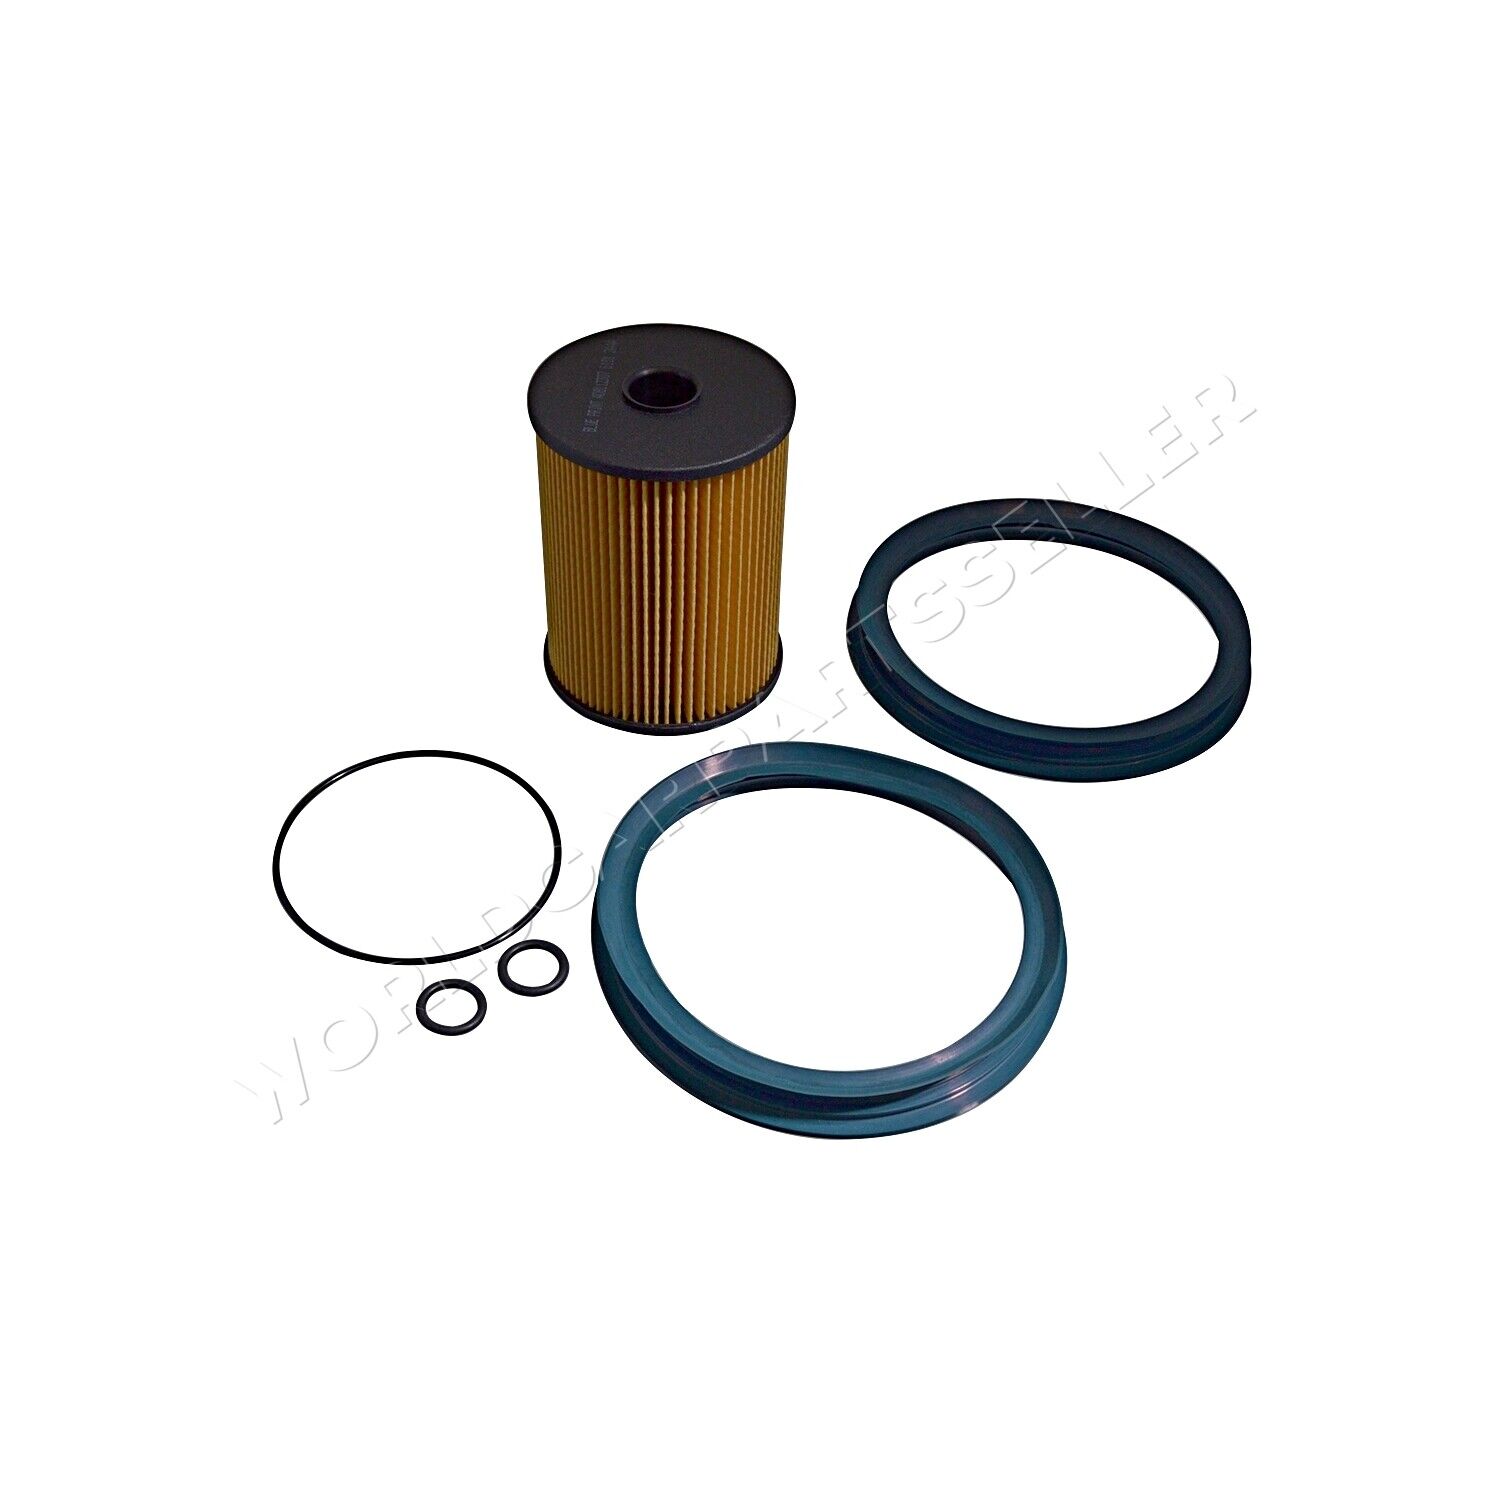 BLUE PRINT Fuel Filter For MINI Clubman R55 R57 Roadster R59 06-15 11252754870